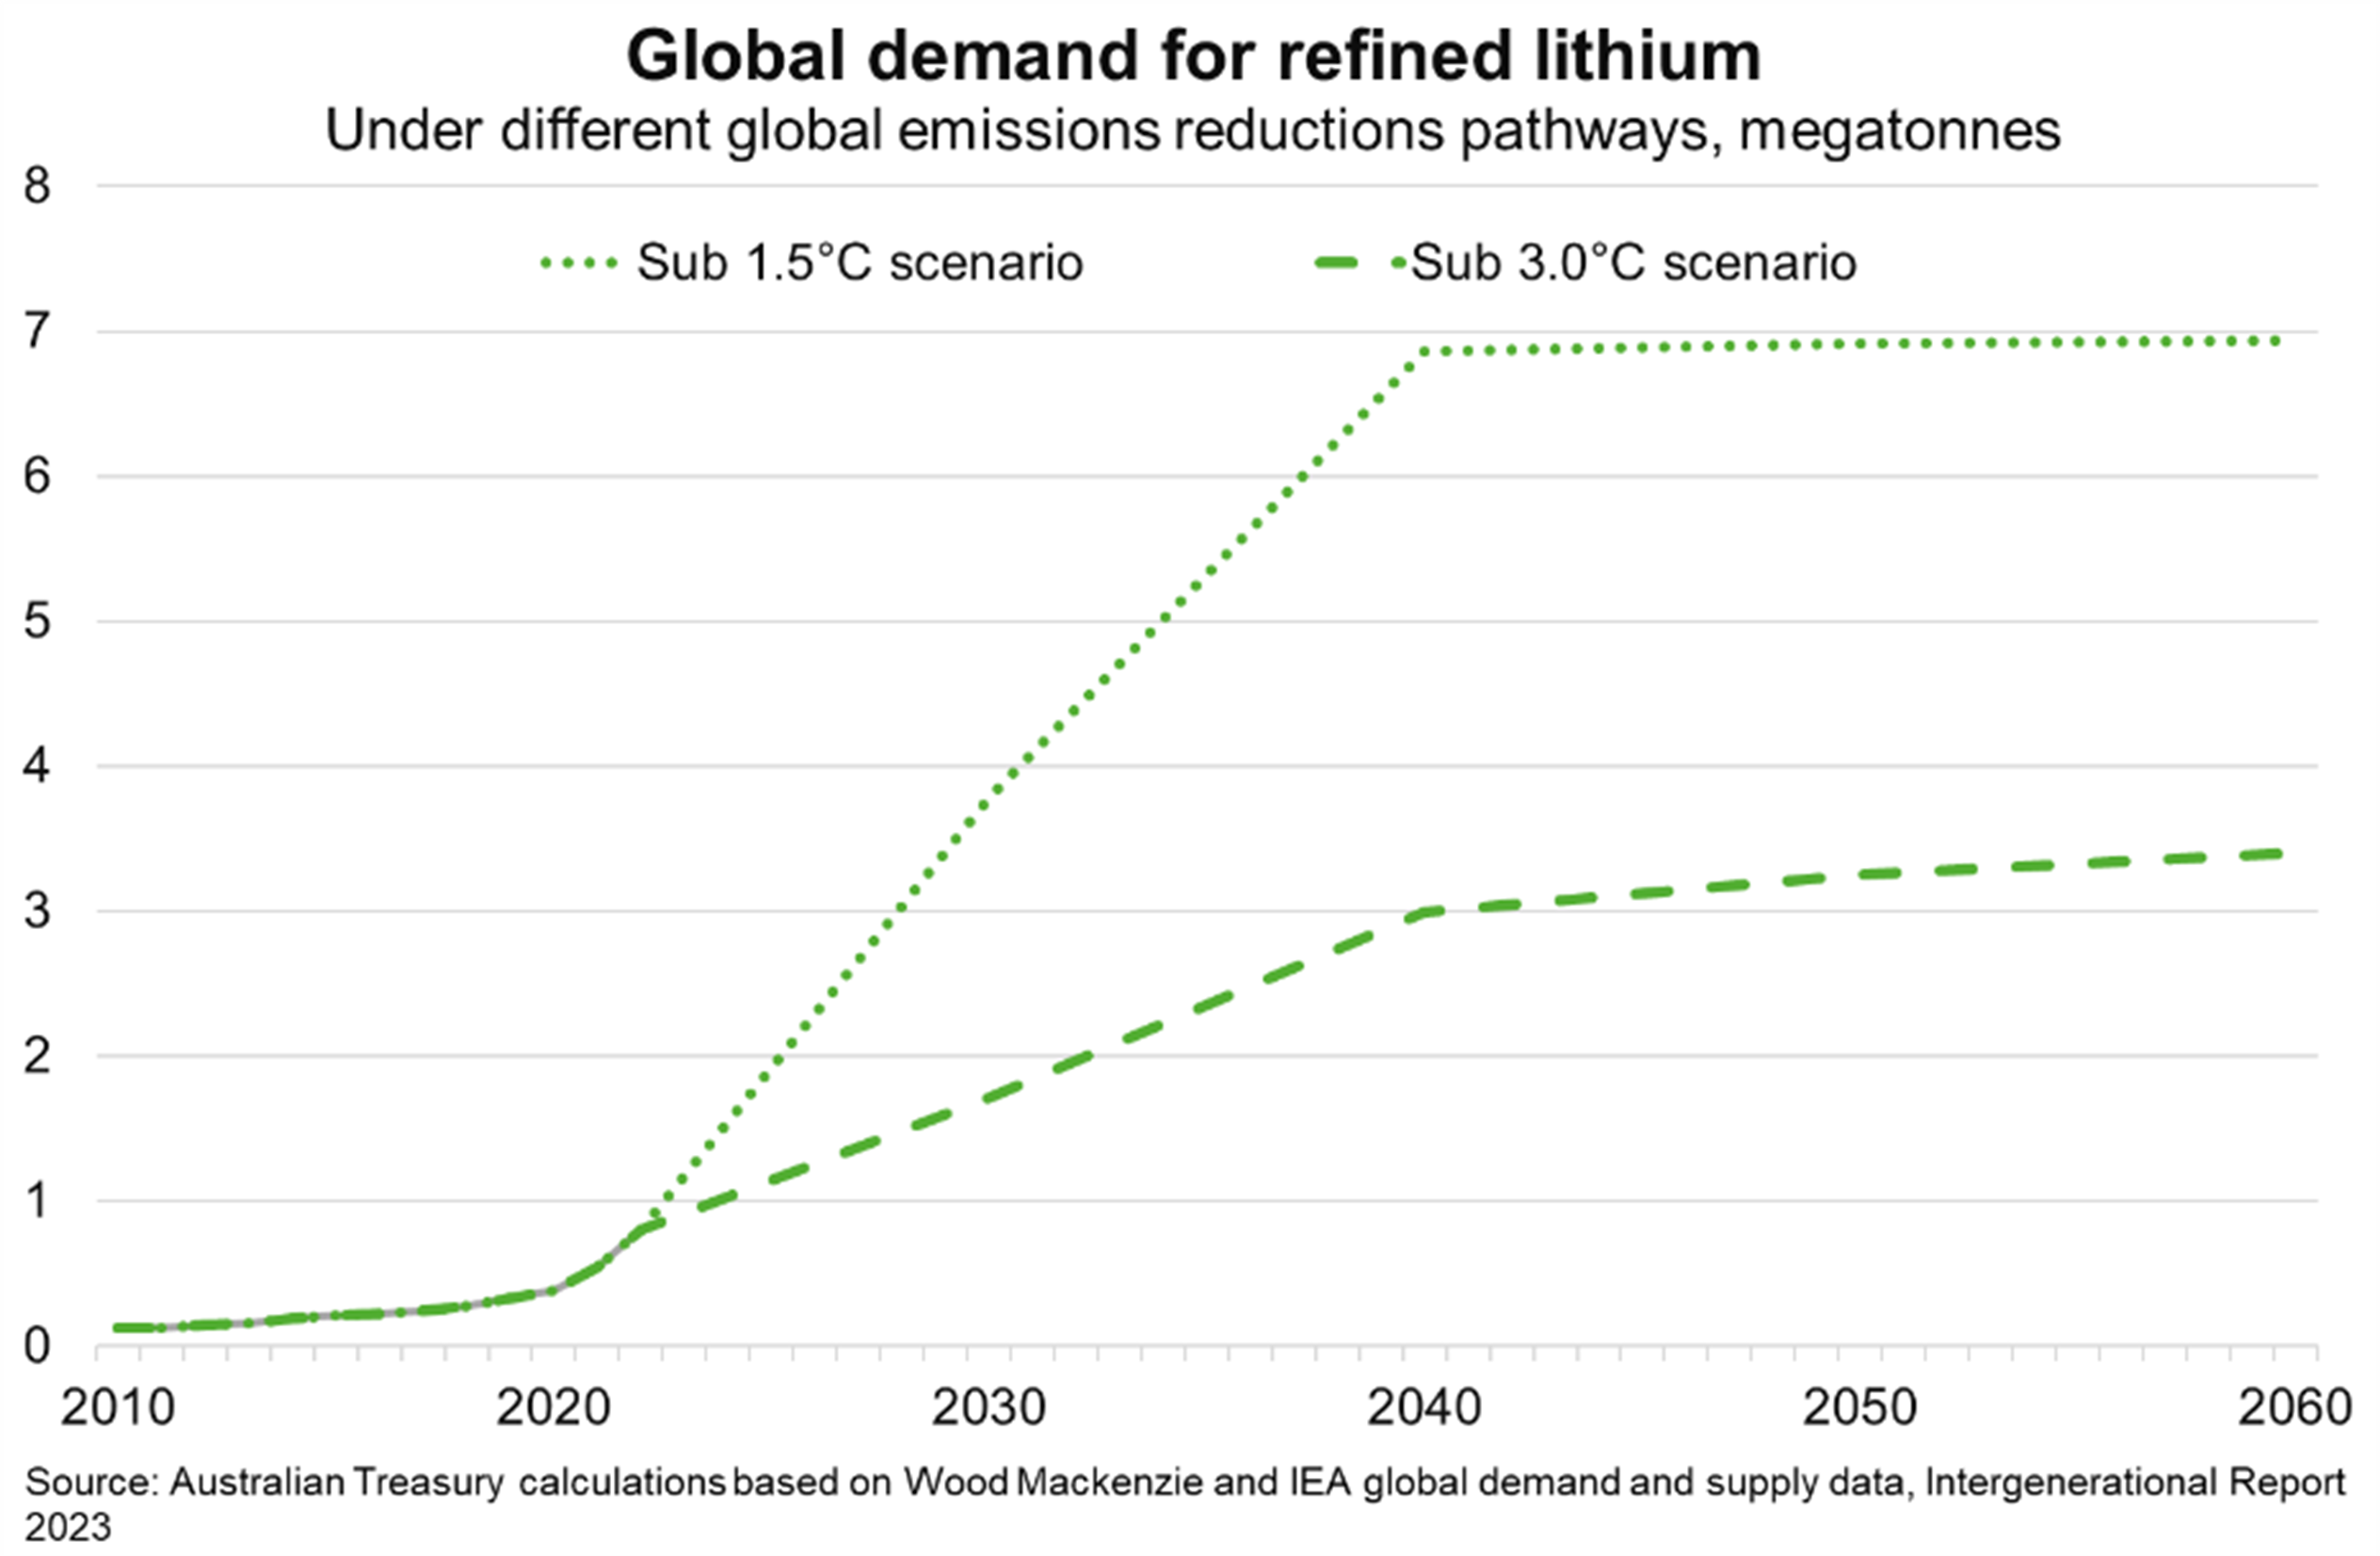 If actions limit temperature increases to 1.5 degrees Celsius. Even if such actions are less effective, global demand for lithium is projected to quadruple. 